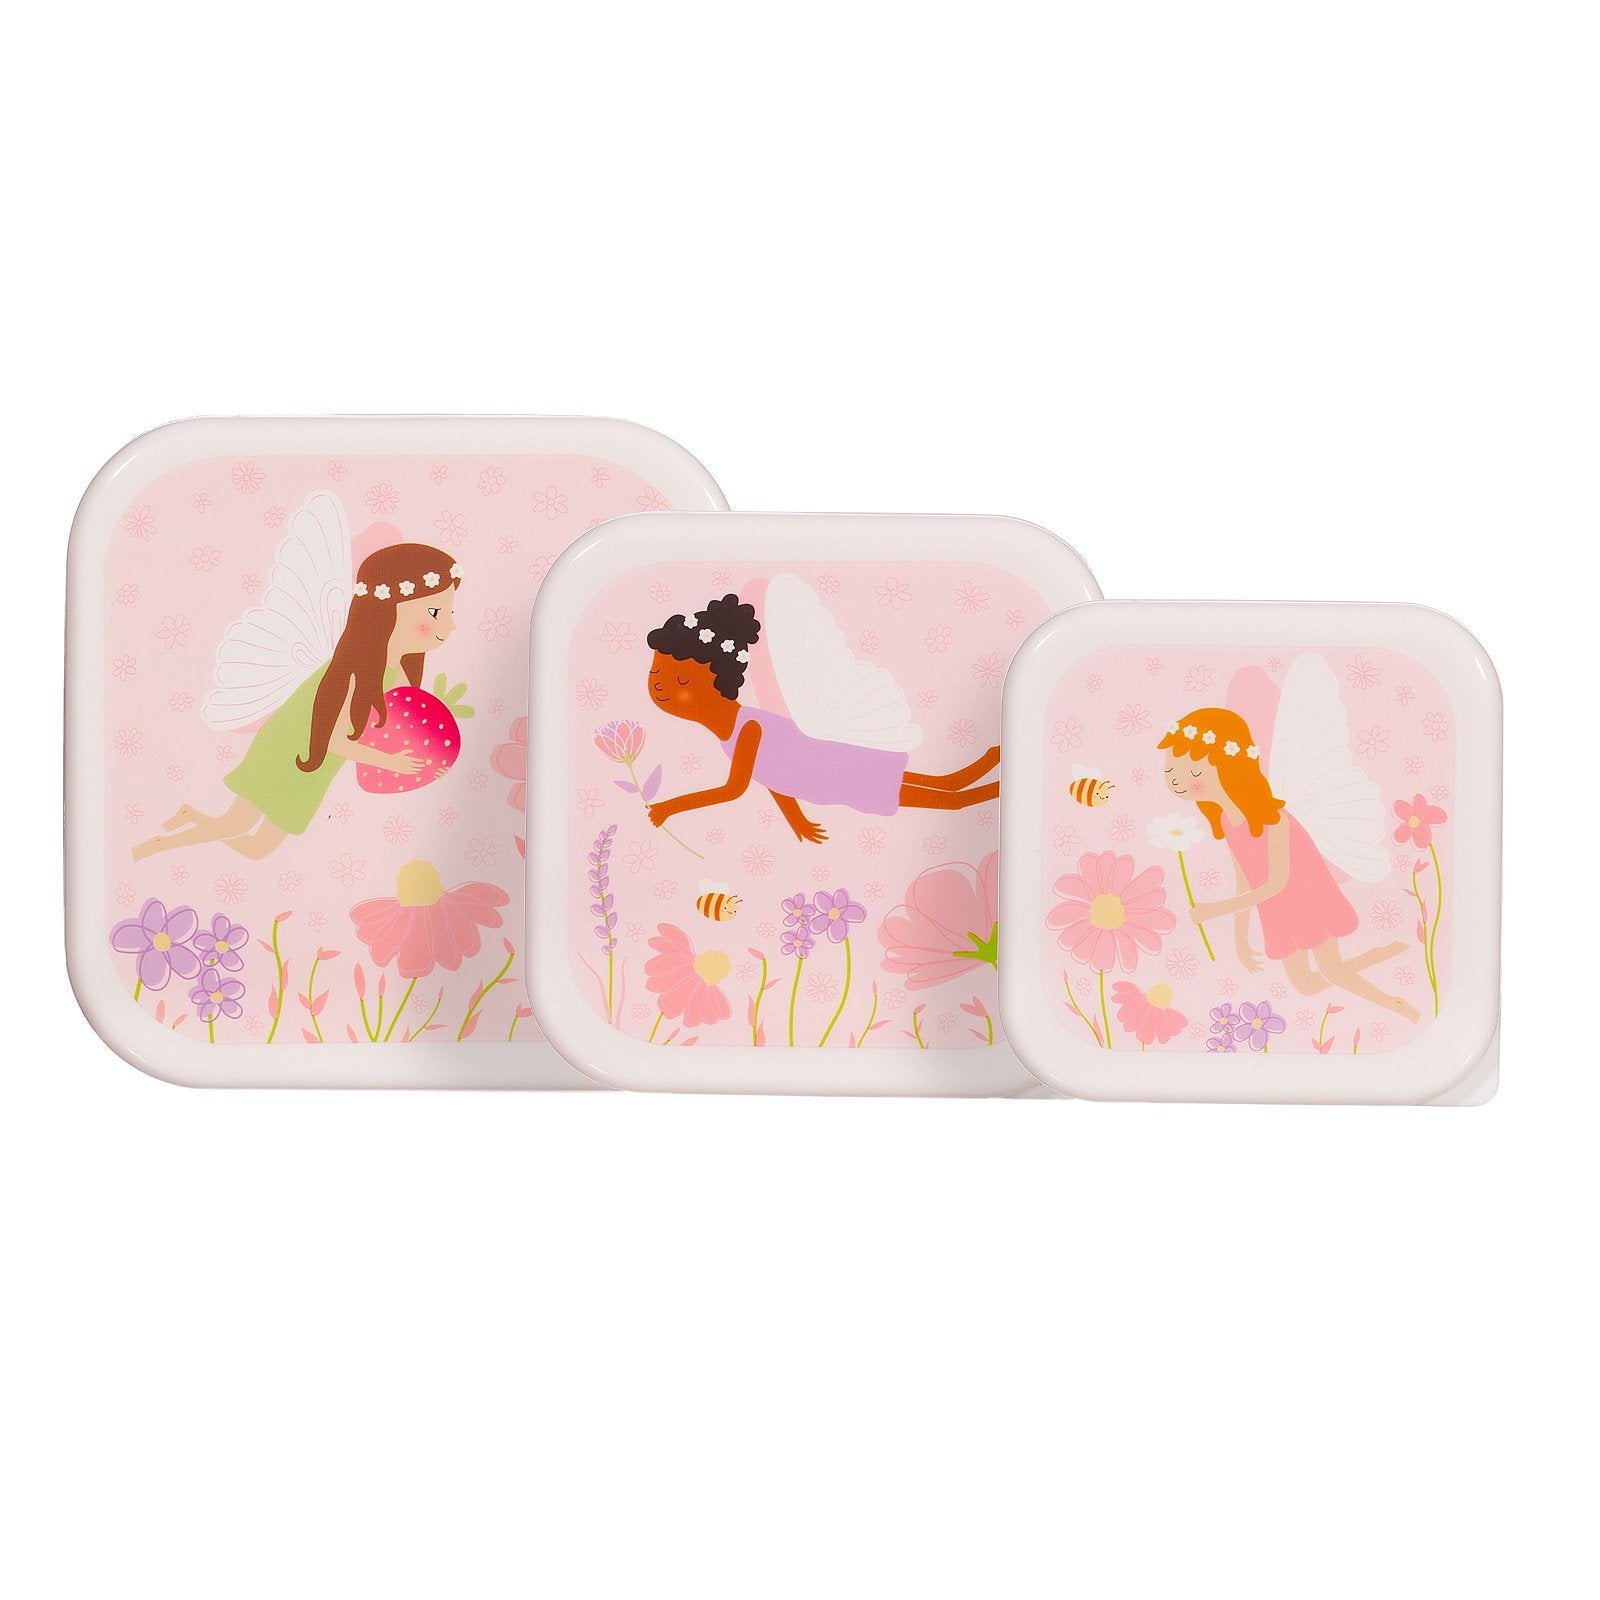 View Fairy Lunch Boxes Set of 3 information